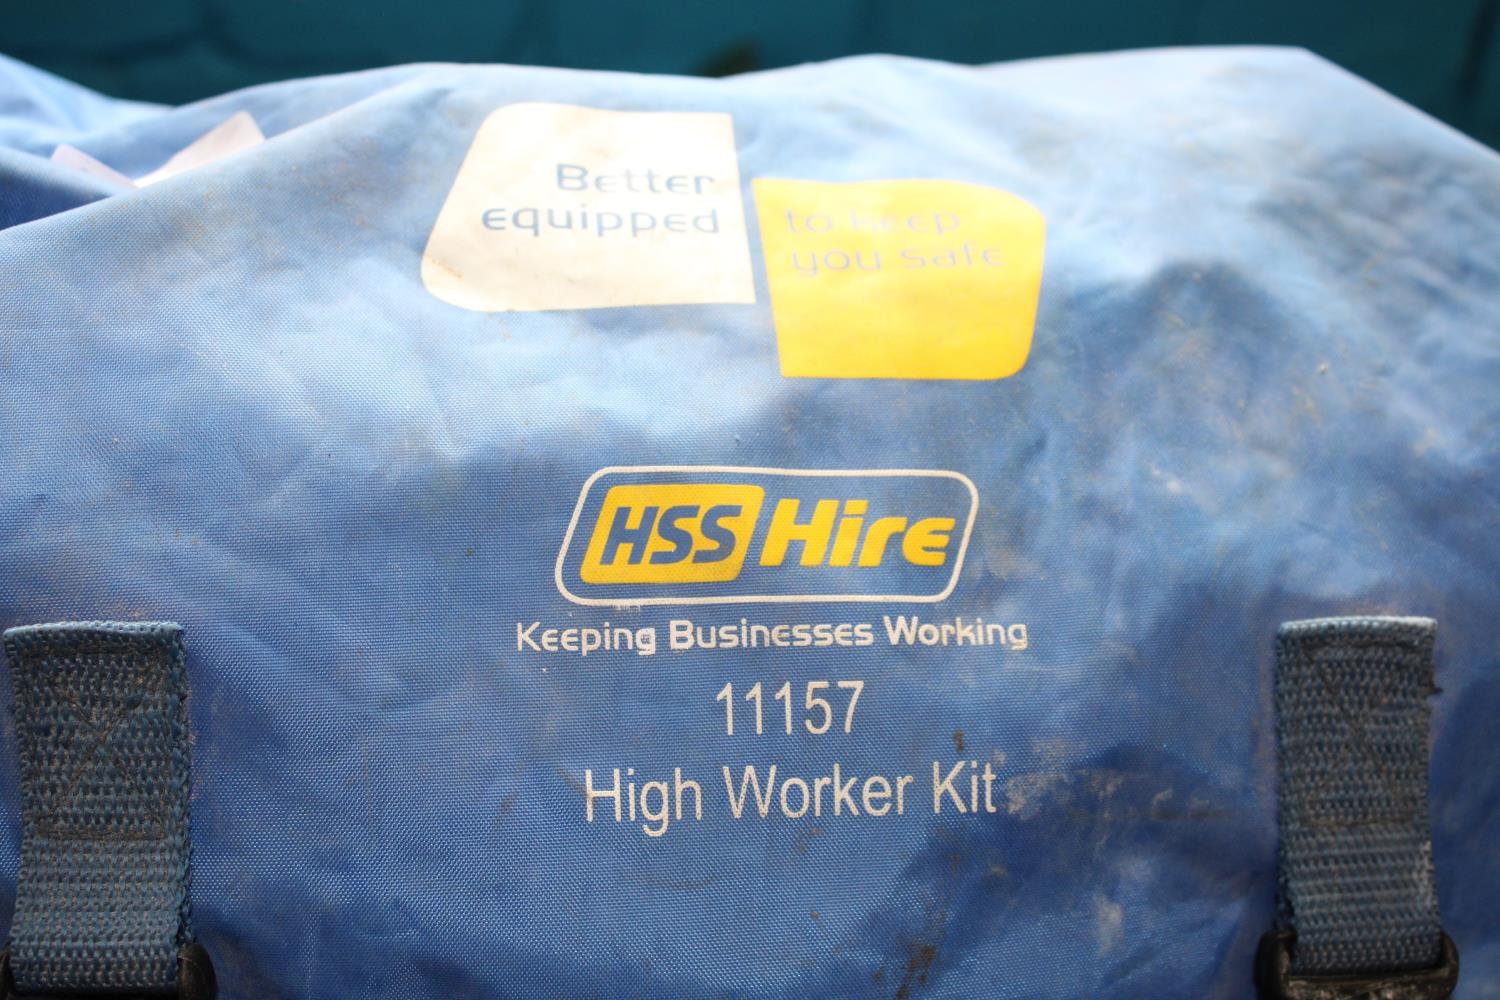 A HSS safety harness for working at heights